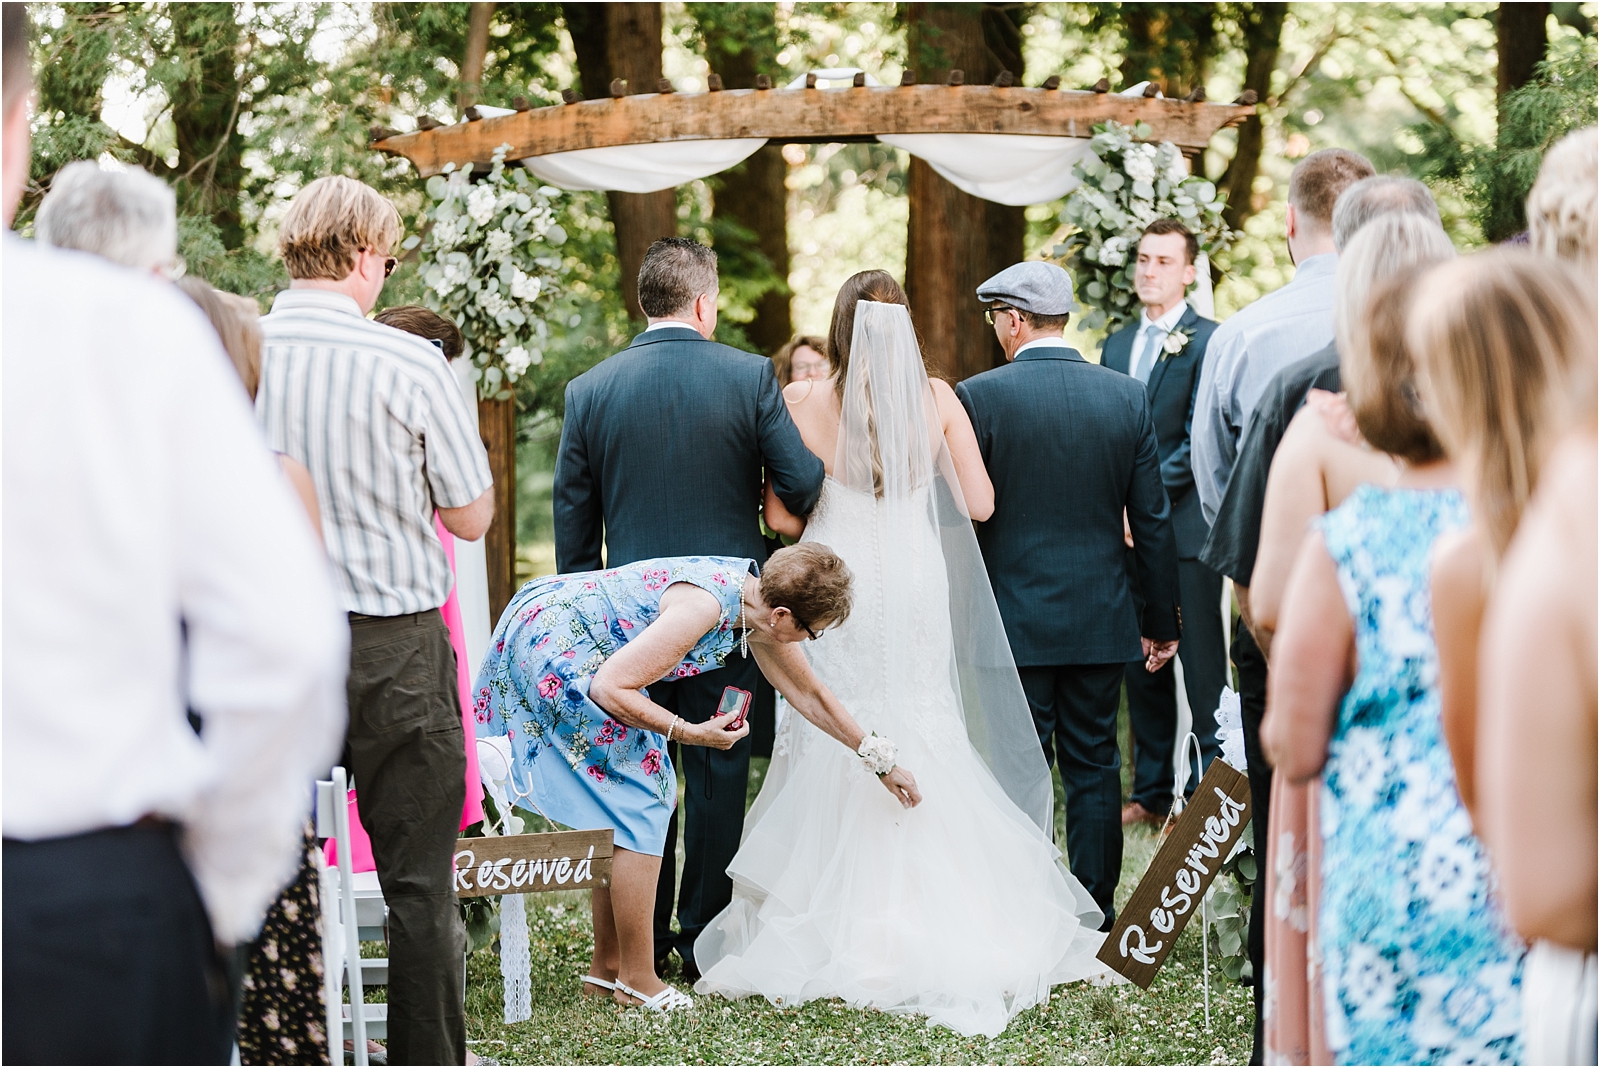 Sunny Summer Wedding at The Stevens Estate at Osgood Hill in North Andover, MA by Boston Wedding Photographer Annmarie Swift